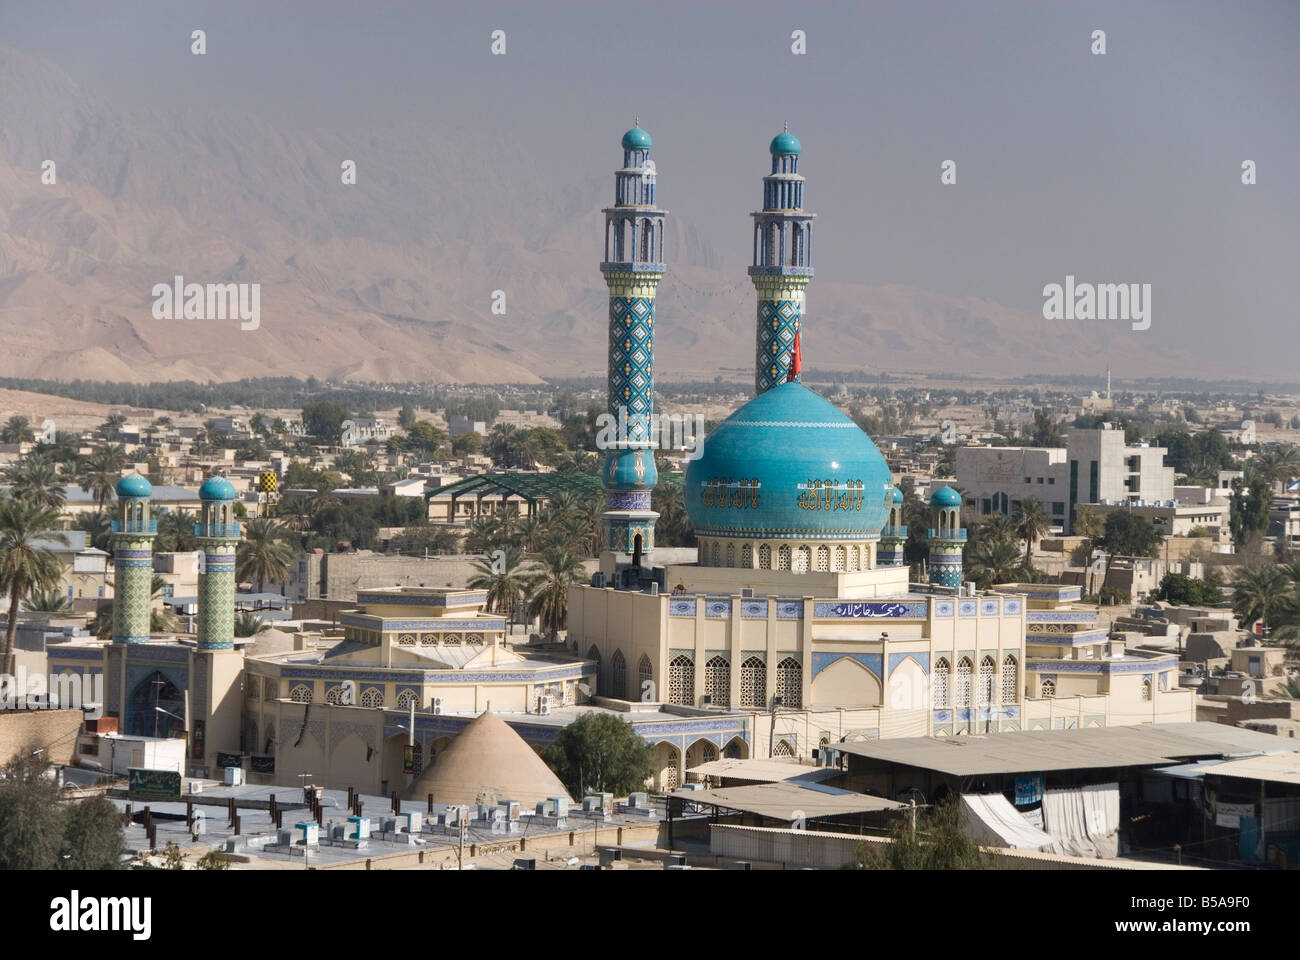 Minarets and dome of main mosque centre of desert town Lar city Fars province southern Iran Middle East Stock Photo